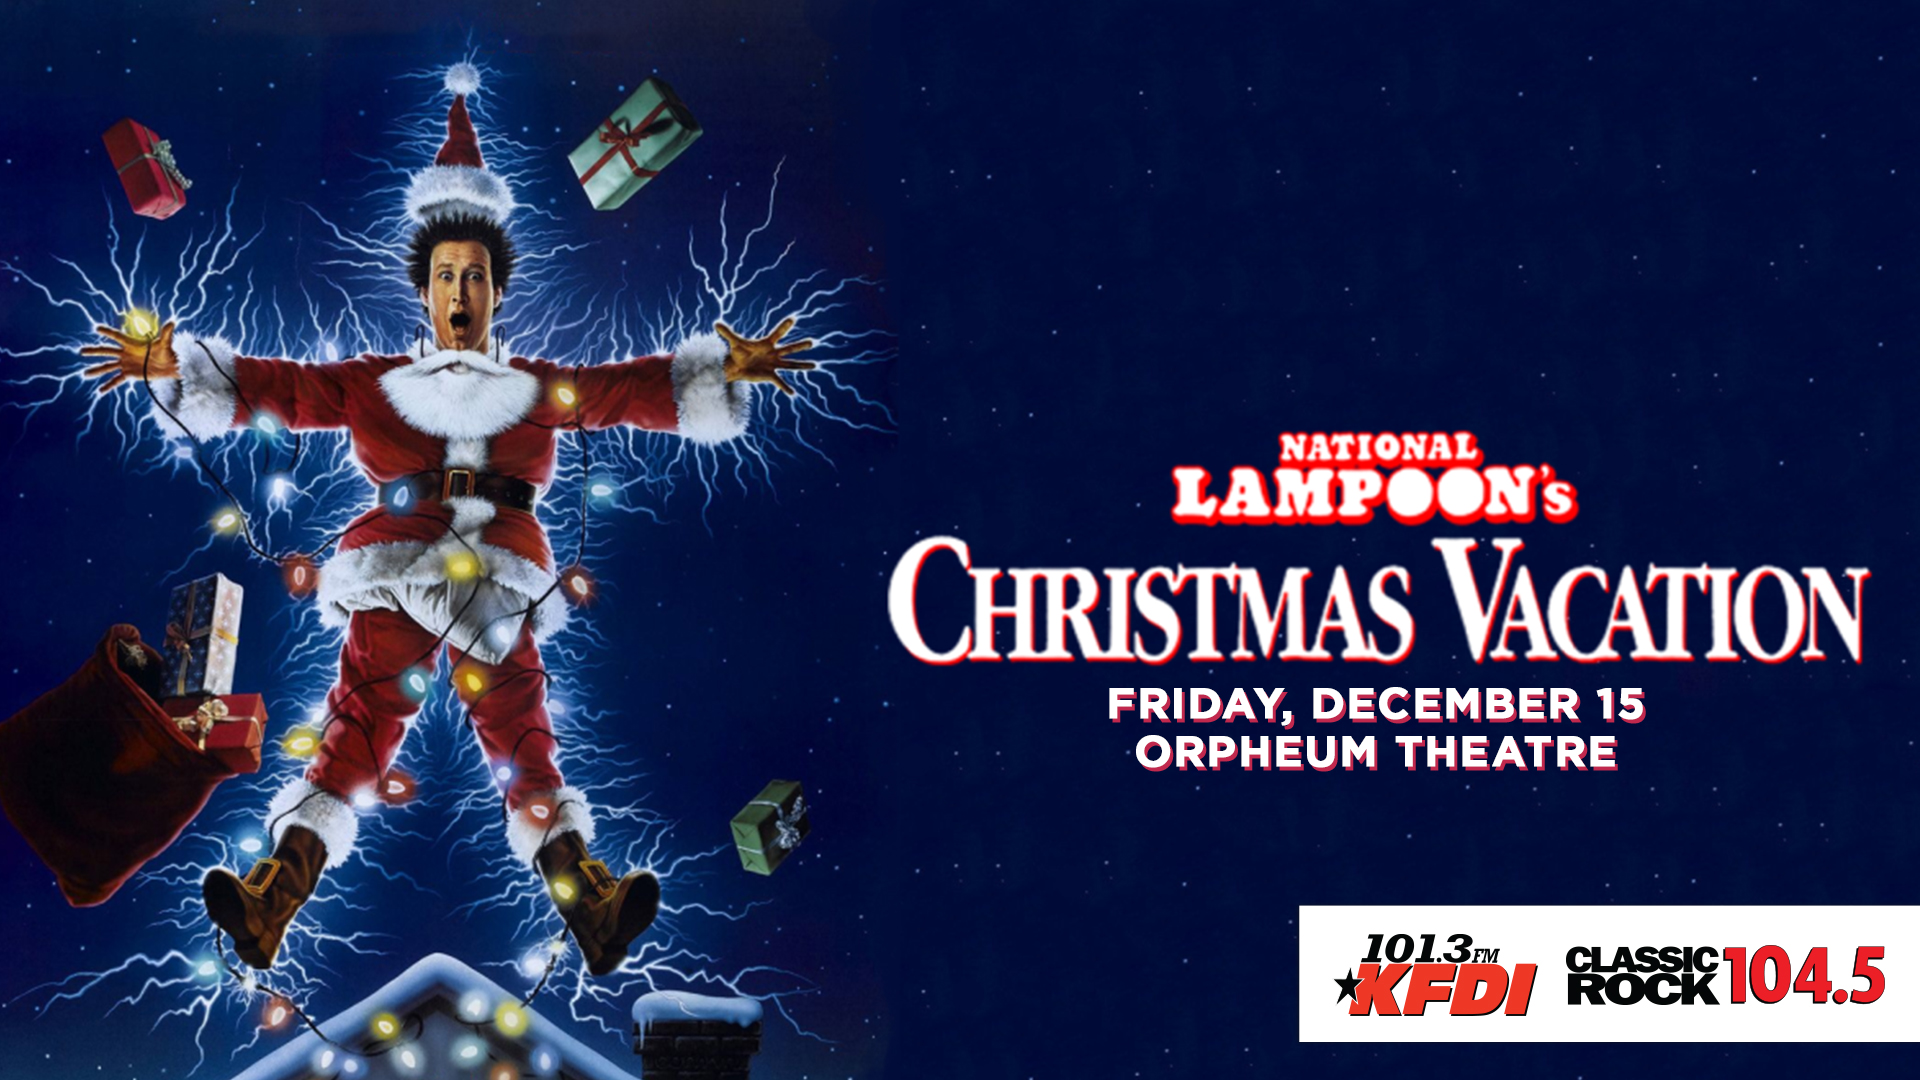 National Lampoons Christmas Vacation Orpheum Theatre